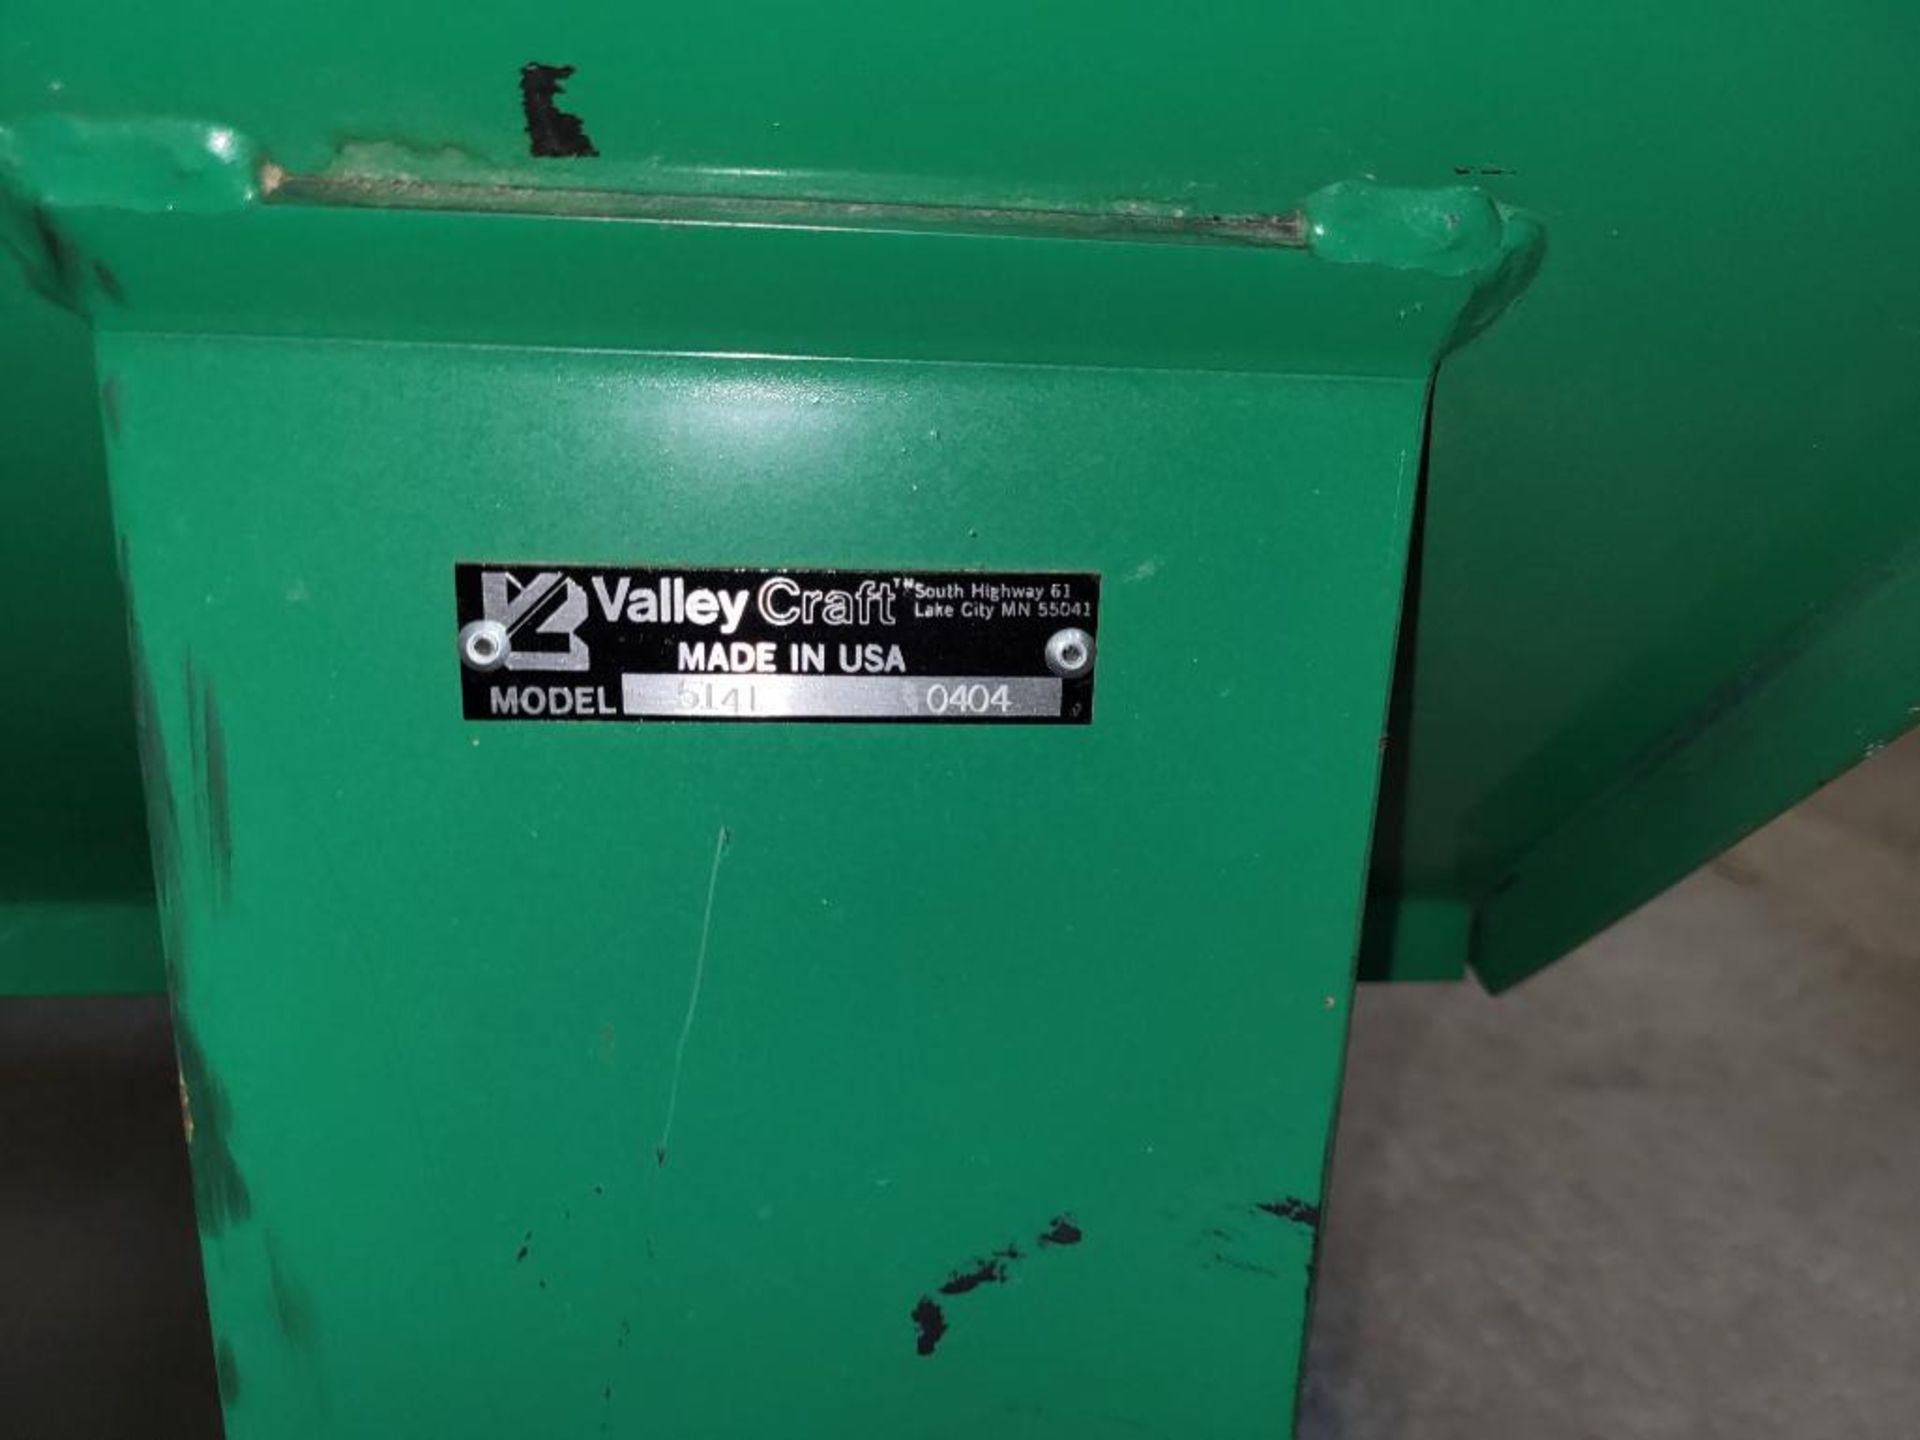 Valley Craft Metal Dump Tote 2000Lbs Capacity On Wheels M/N 5141 NO CONTENTS - Image 3 of 4